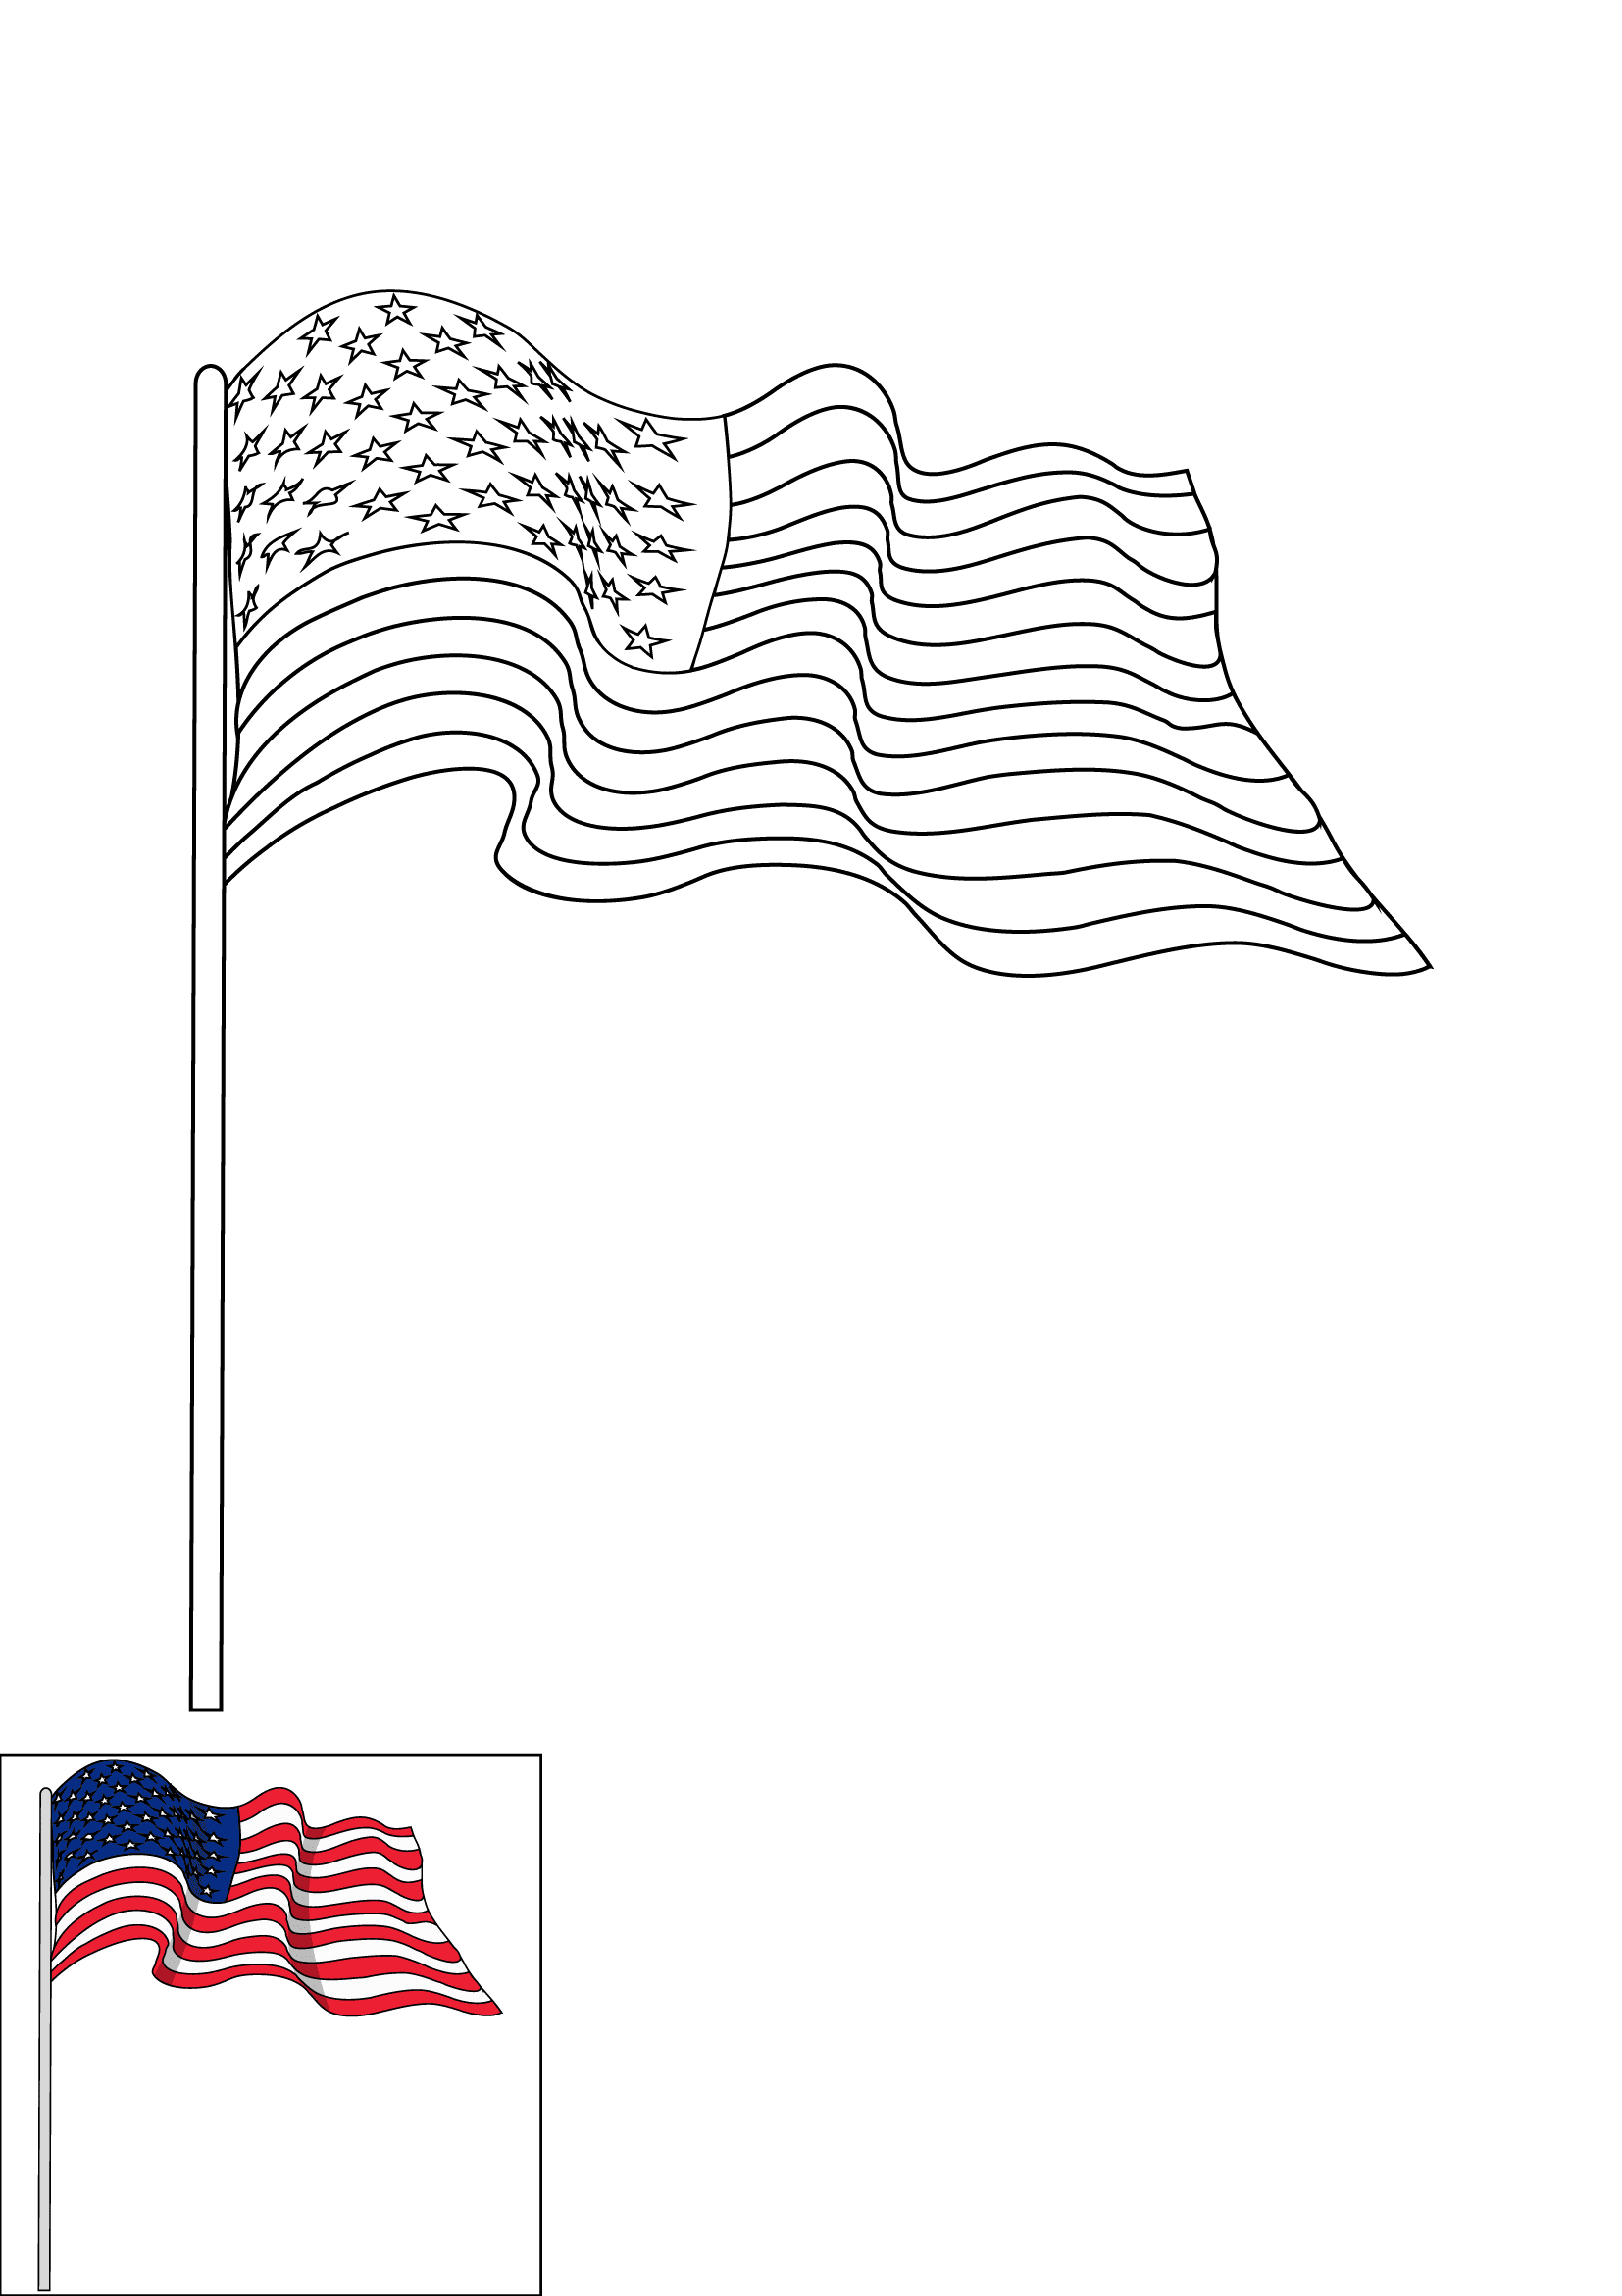 How to Draw The American Flag Step by Step Printable Color